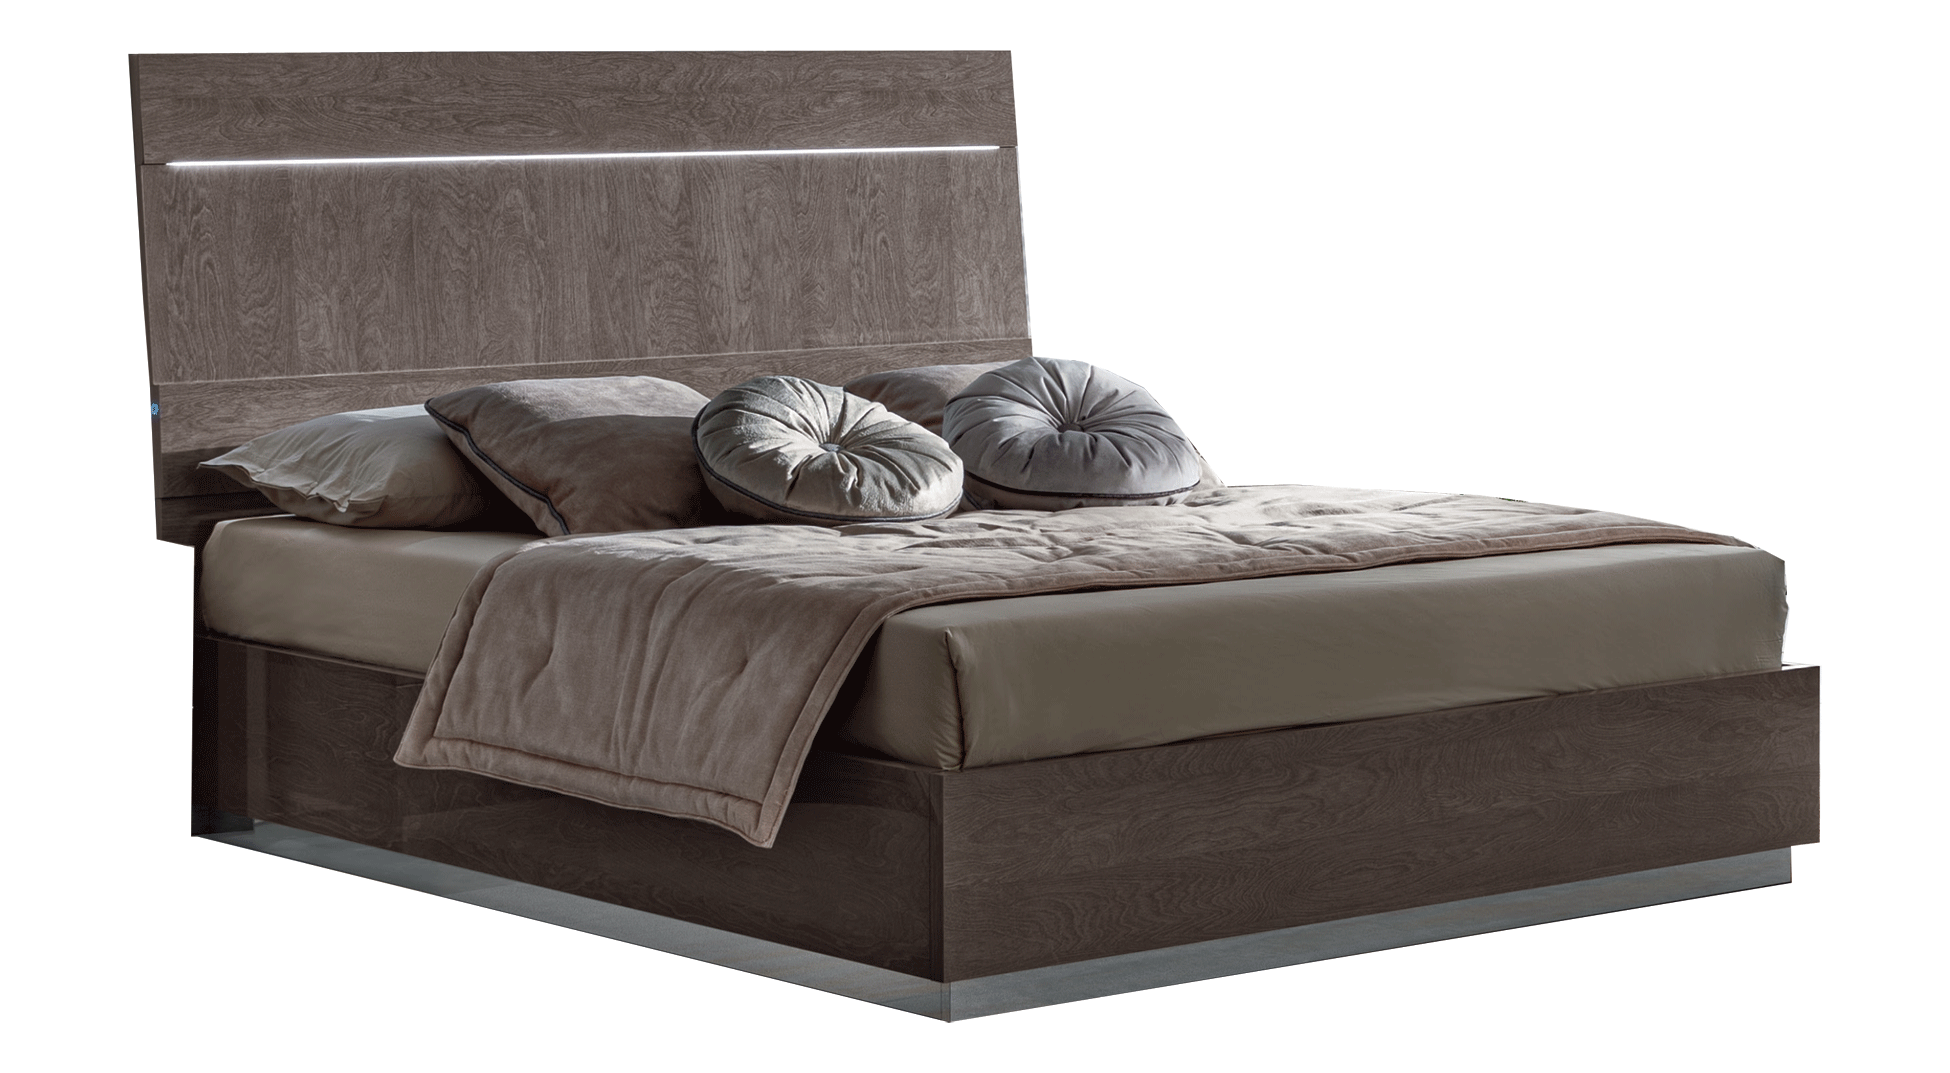 Brands Camel Classic Collection, Italy Kroma SILVER Bed